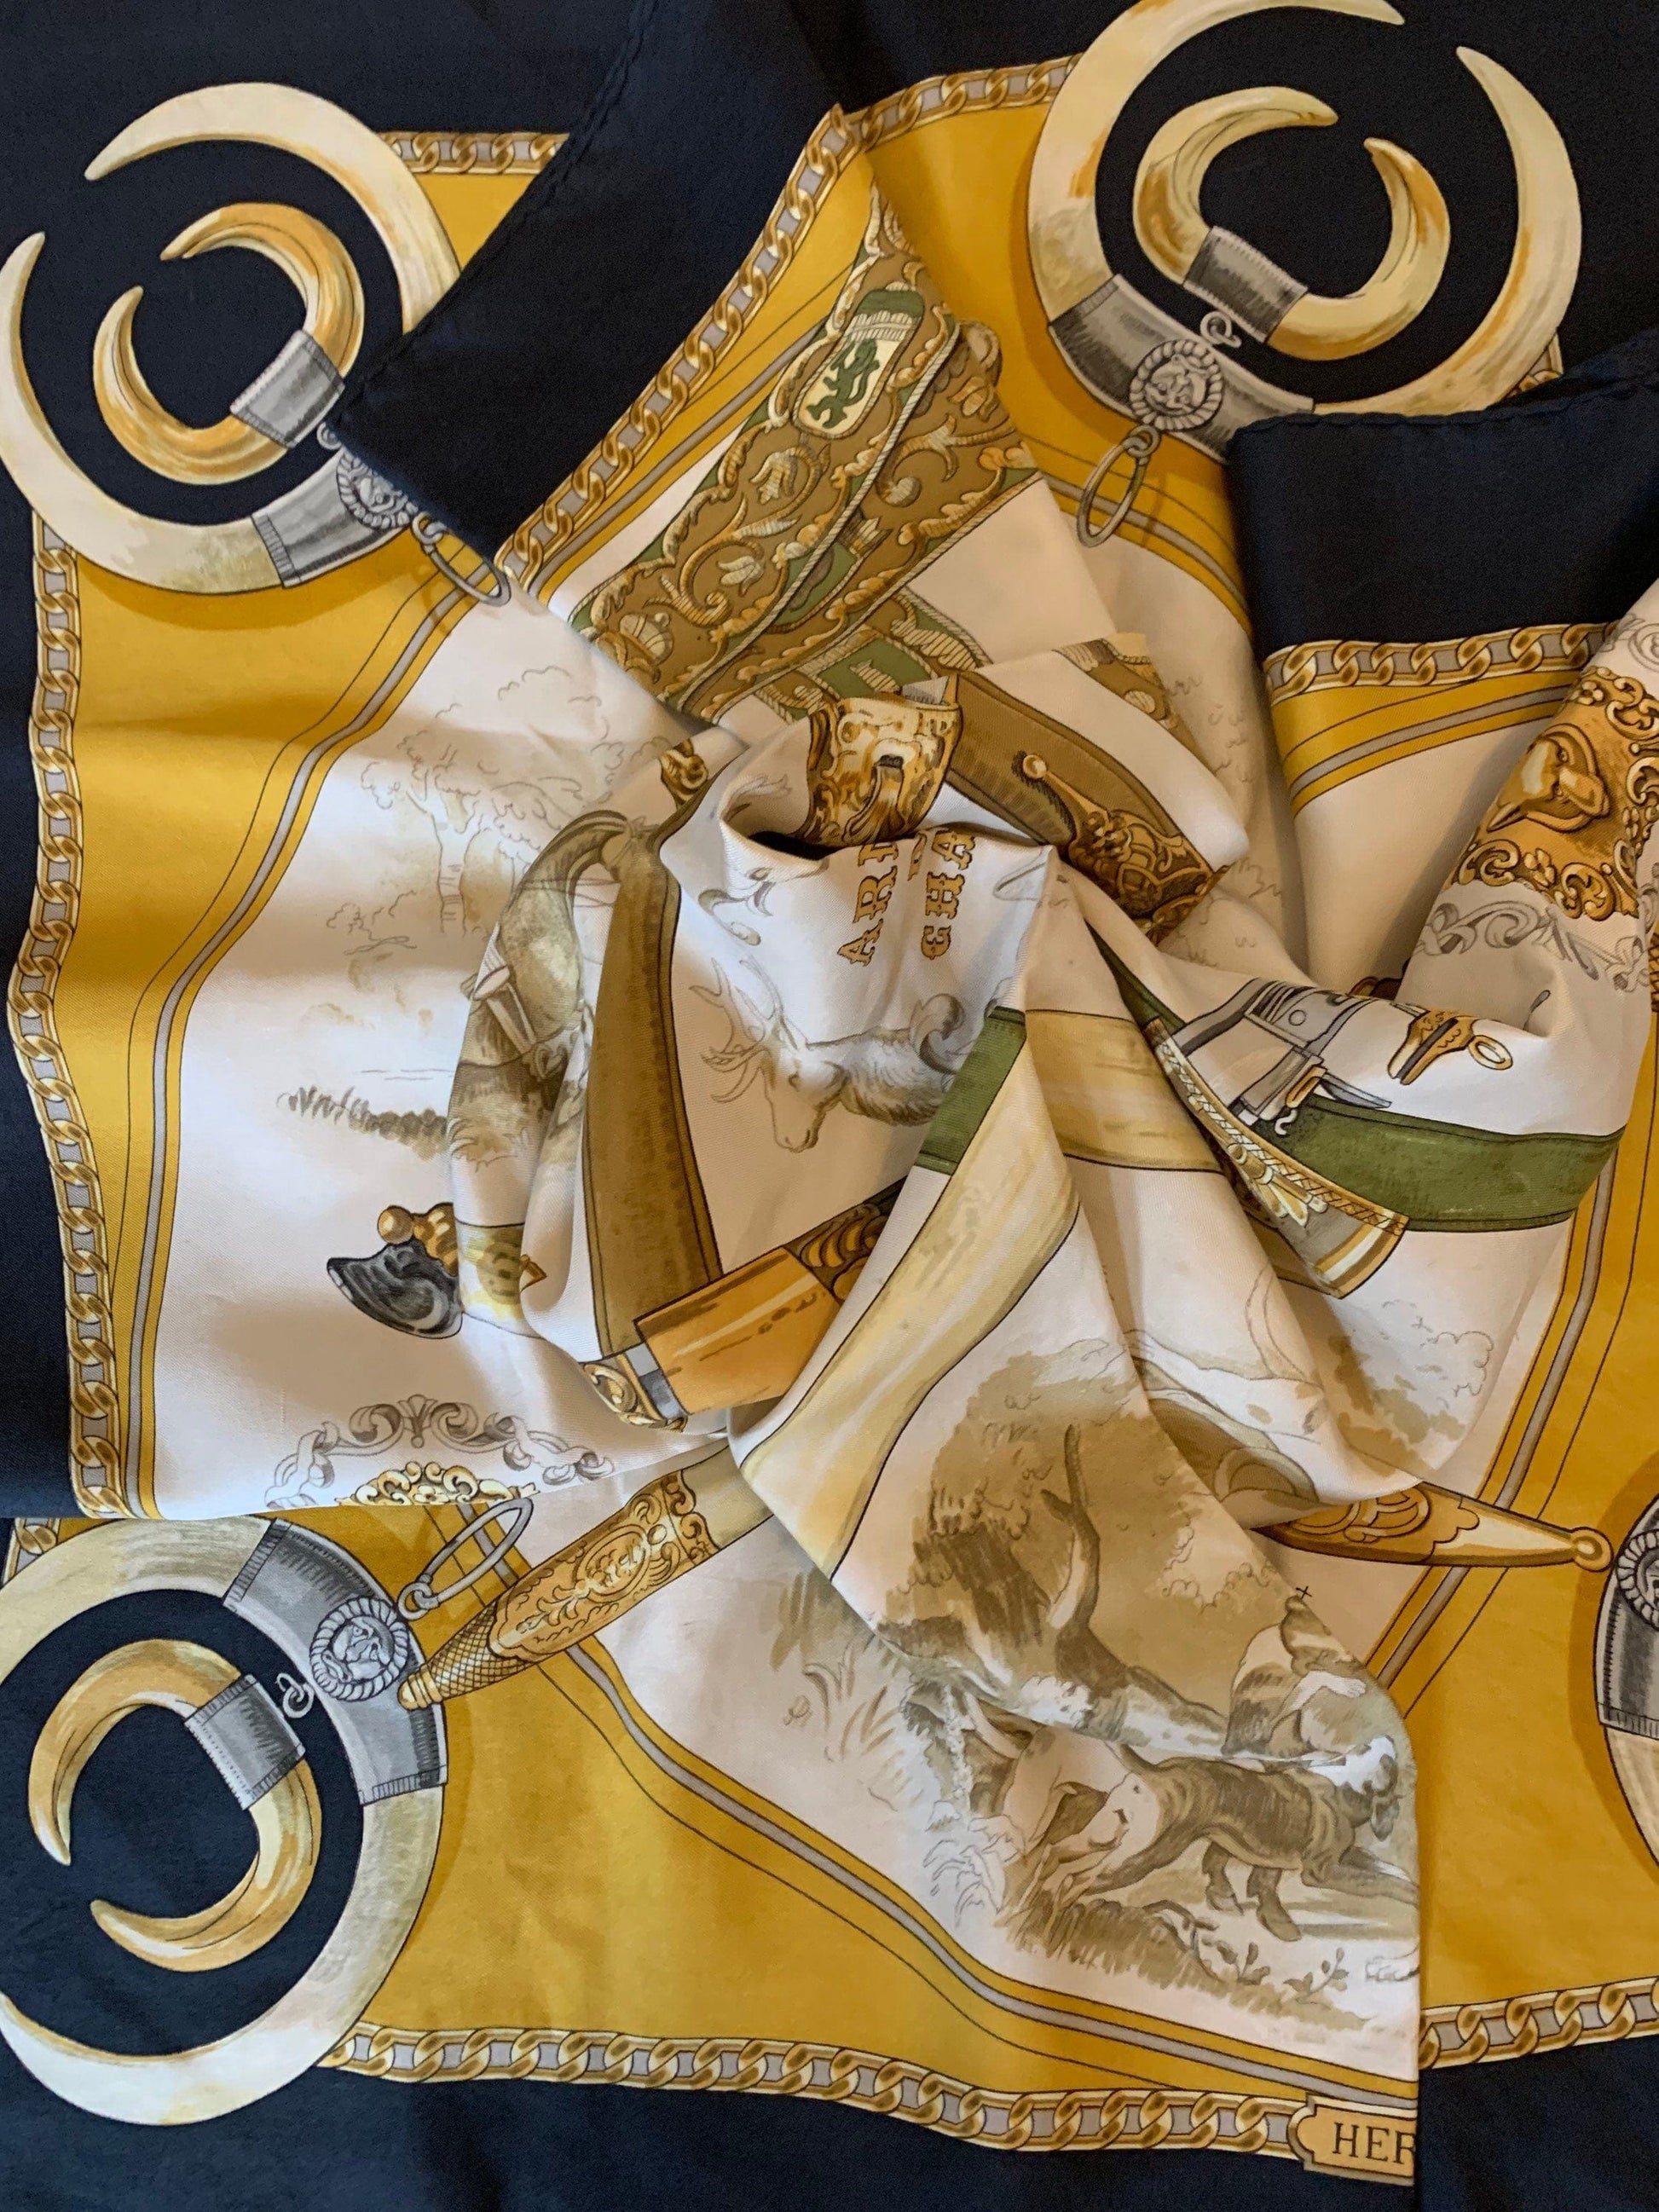 Vintage Hermes Scarf &#39;Armes de Chasse &#39; Phillip Ledoux 1970 Silk Scarf 90cm x 90cm - Navy Gold and Green Colourway